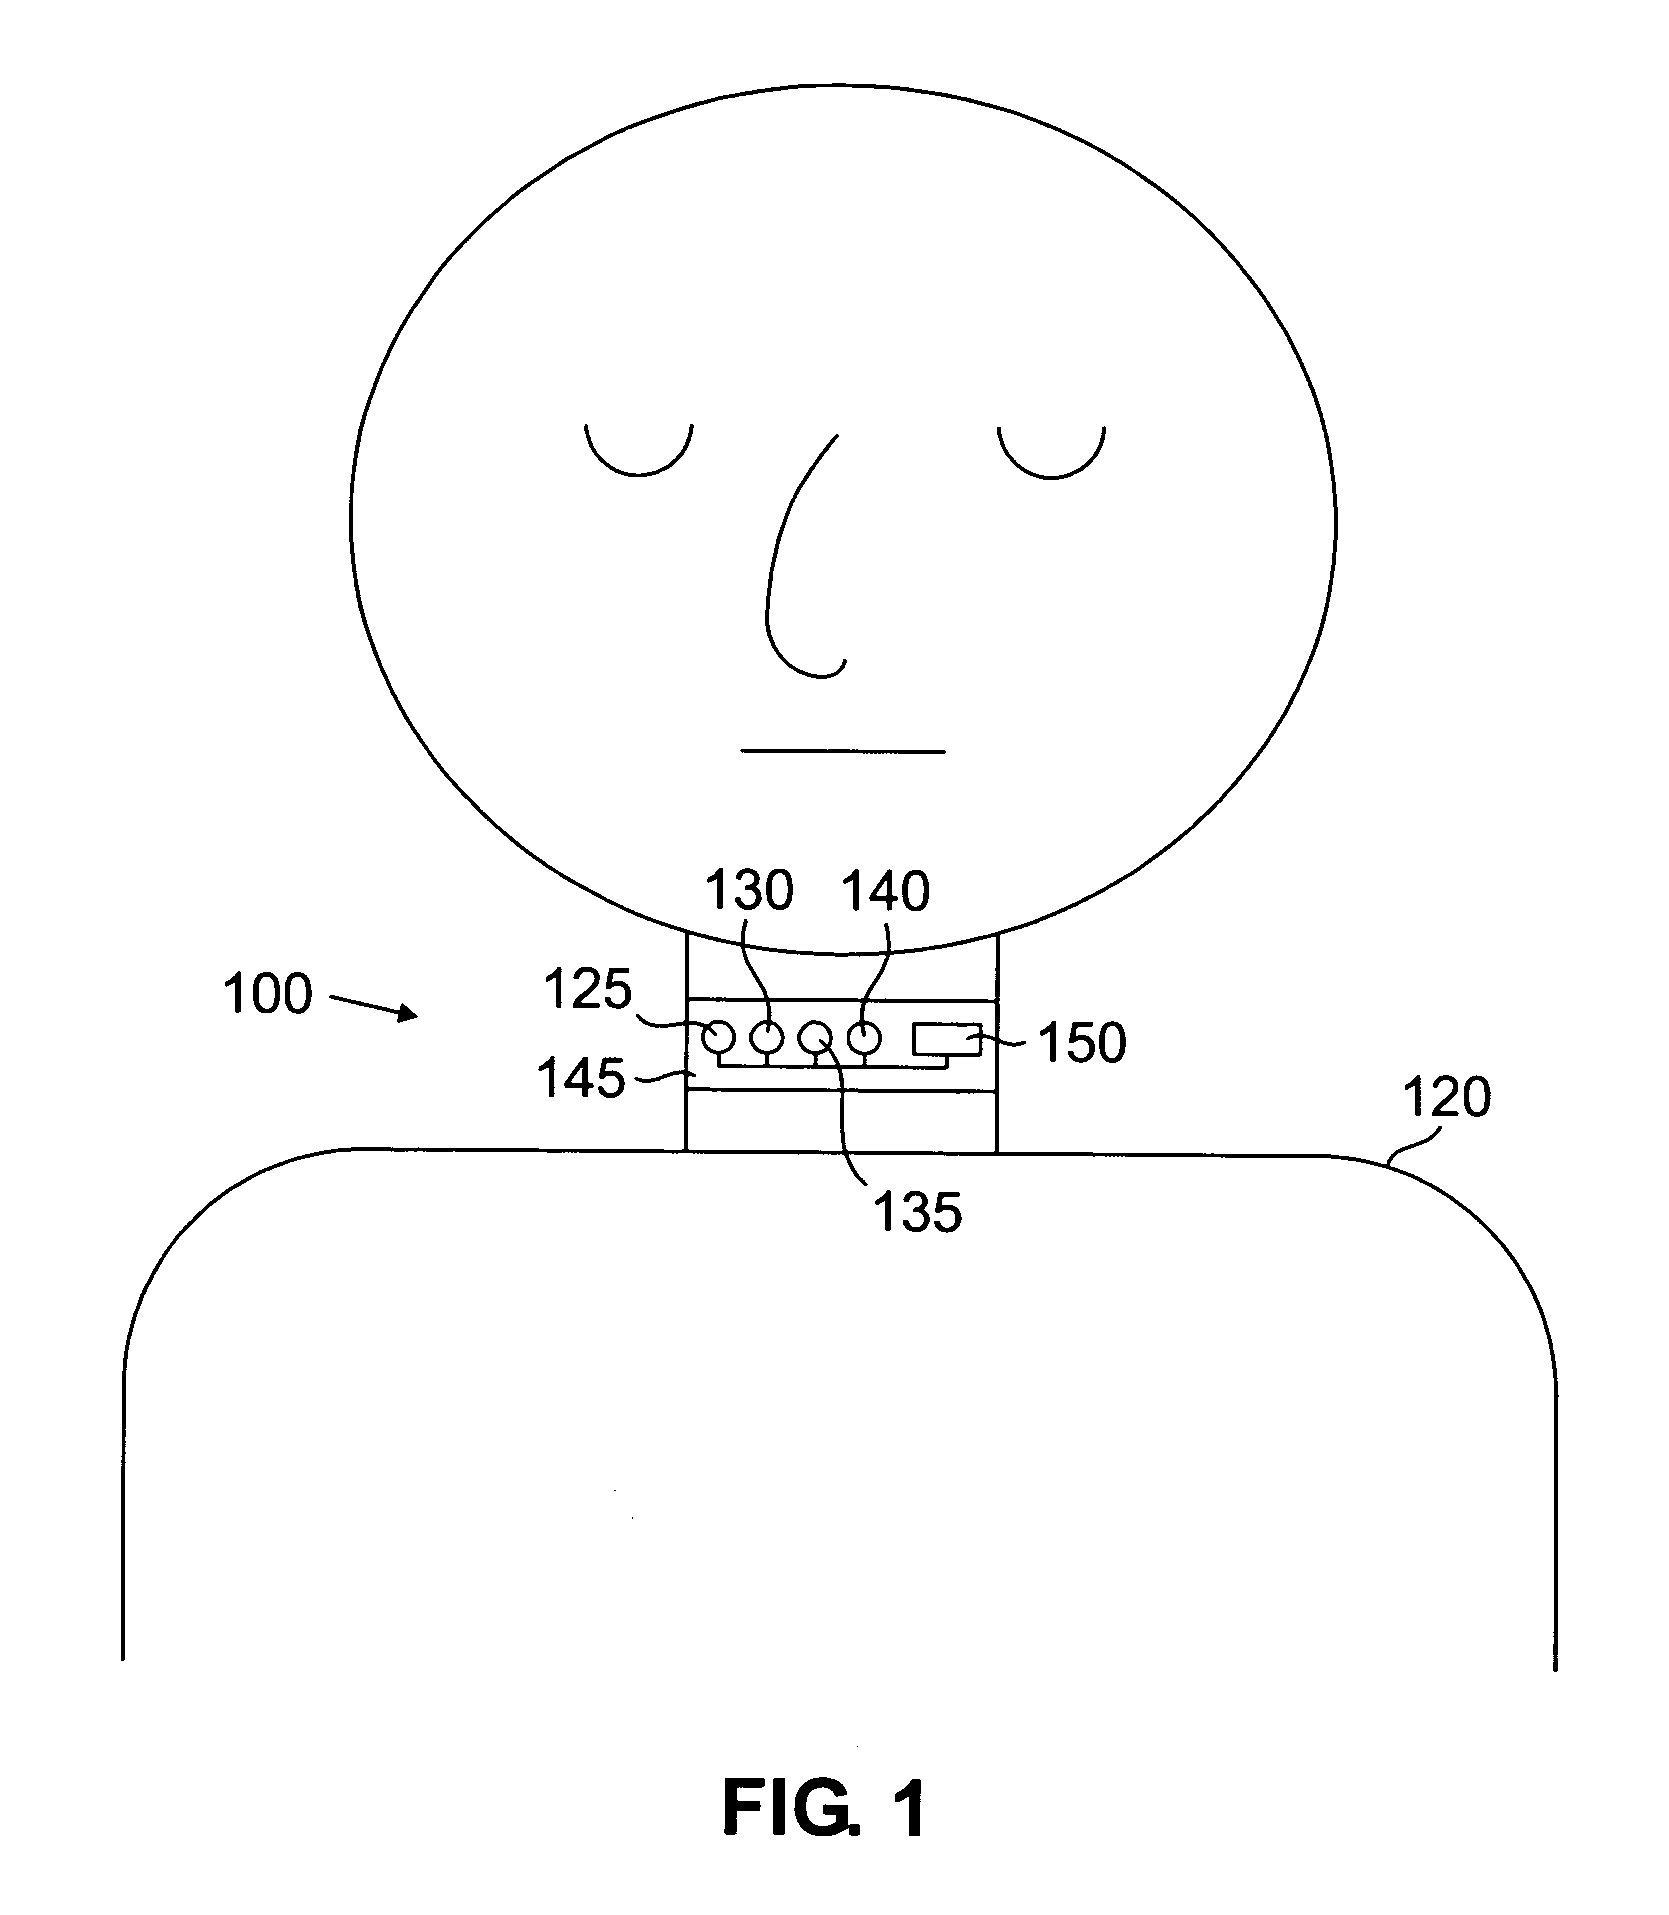 System and method for detecting the onset of an obstructive sleep apnea event